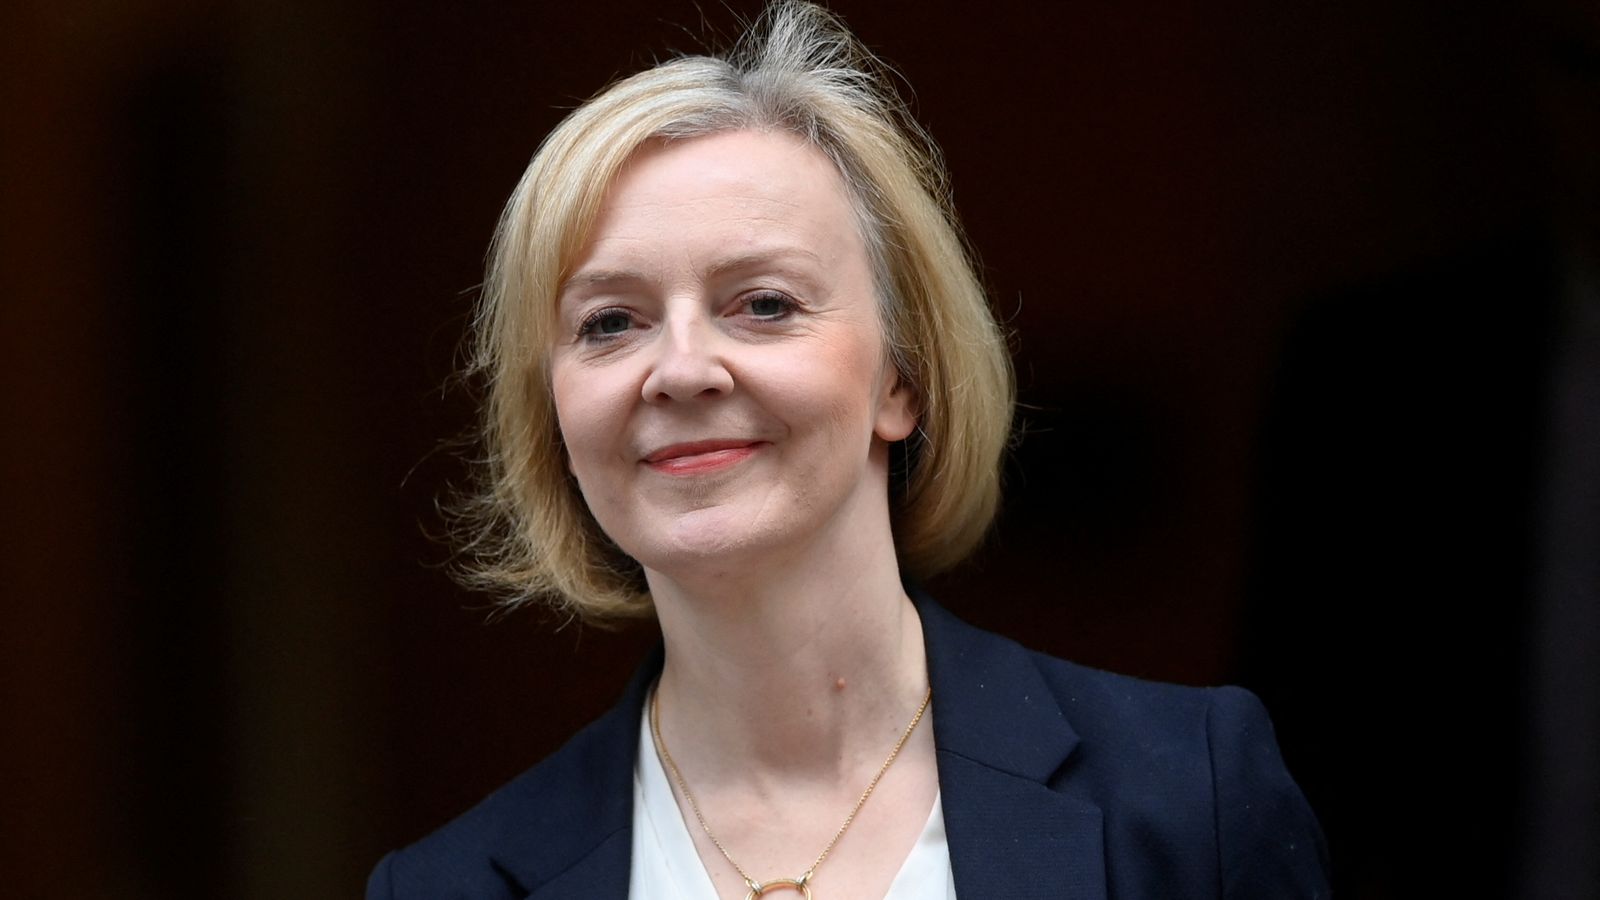 Liz Truss pulls out of planned event as pressure on her continues